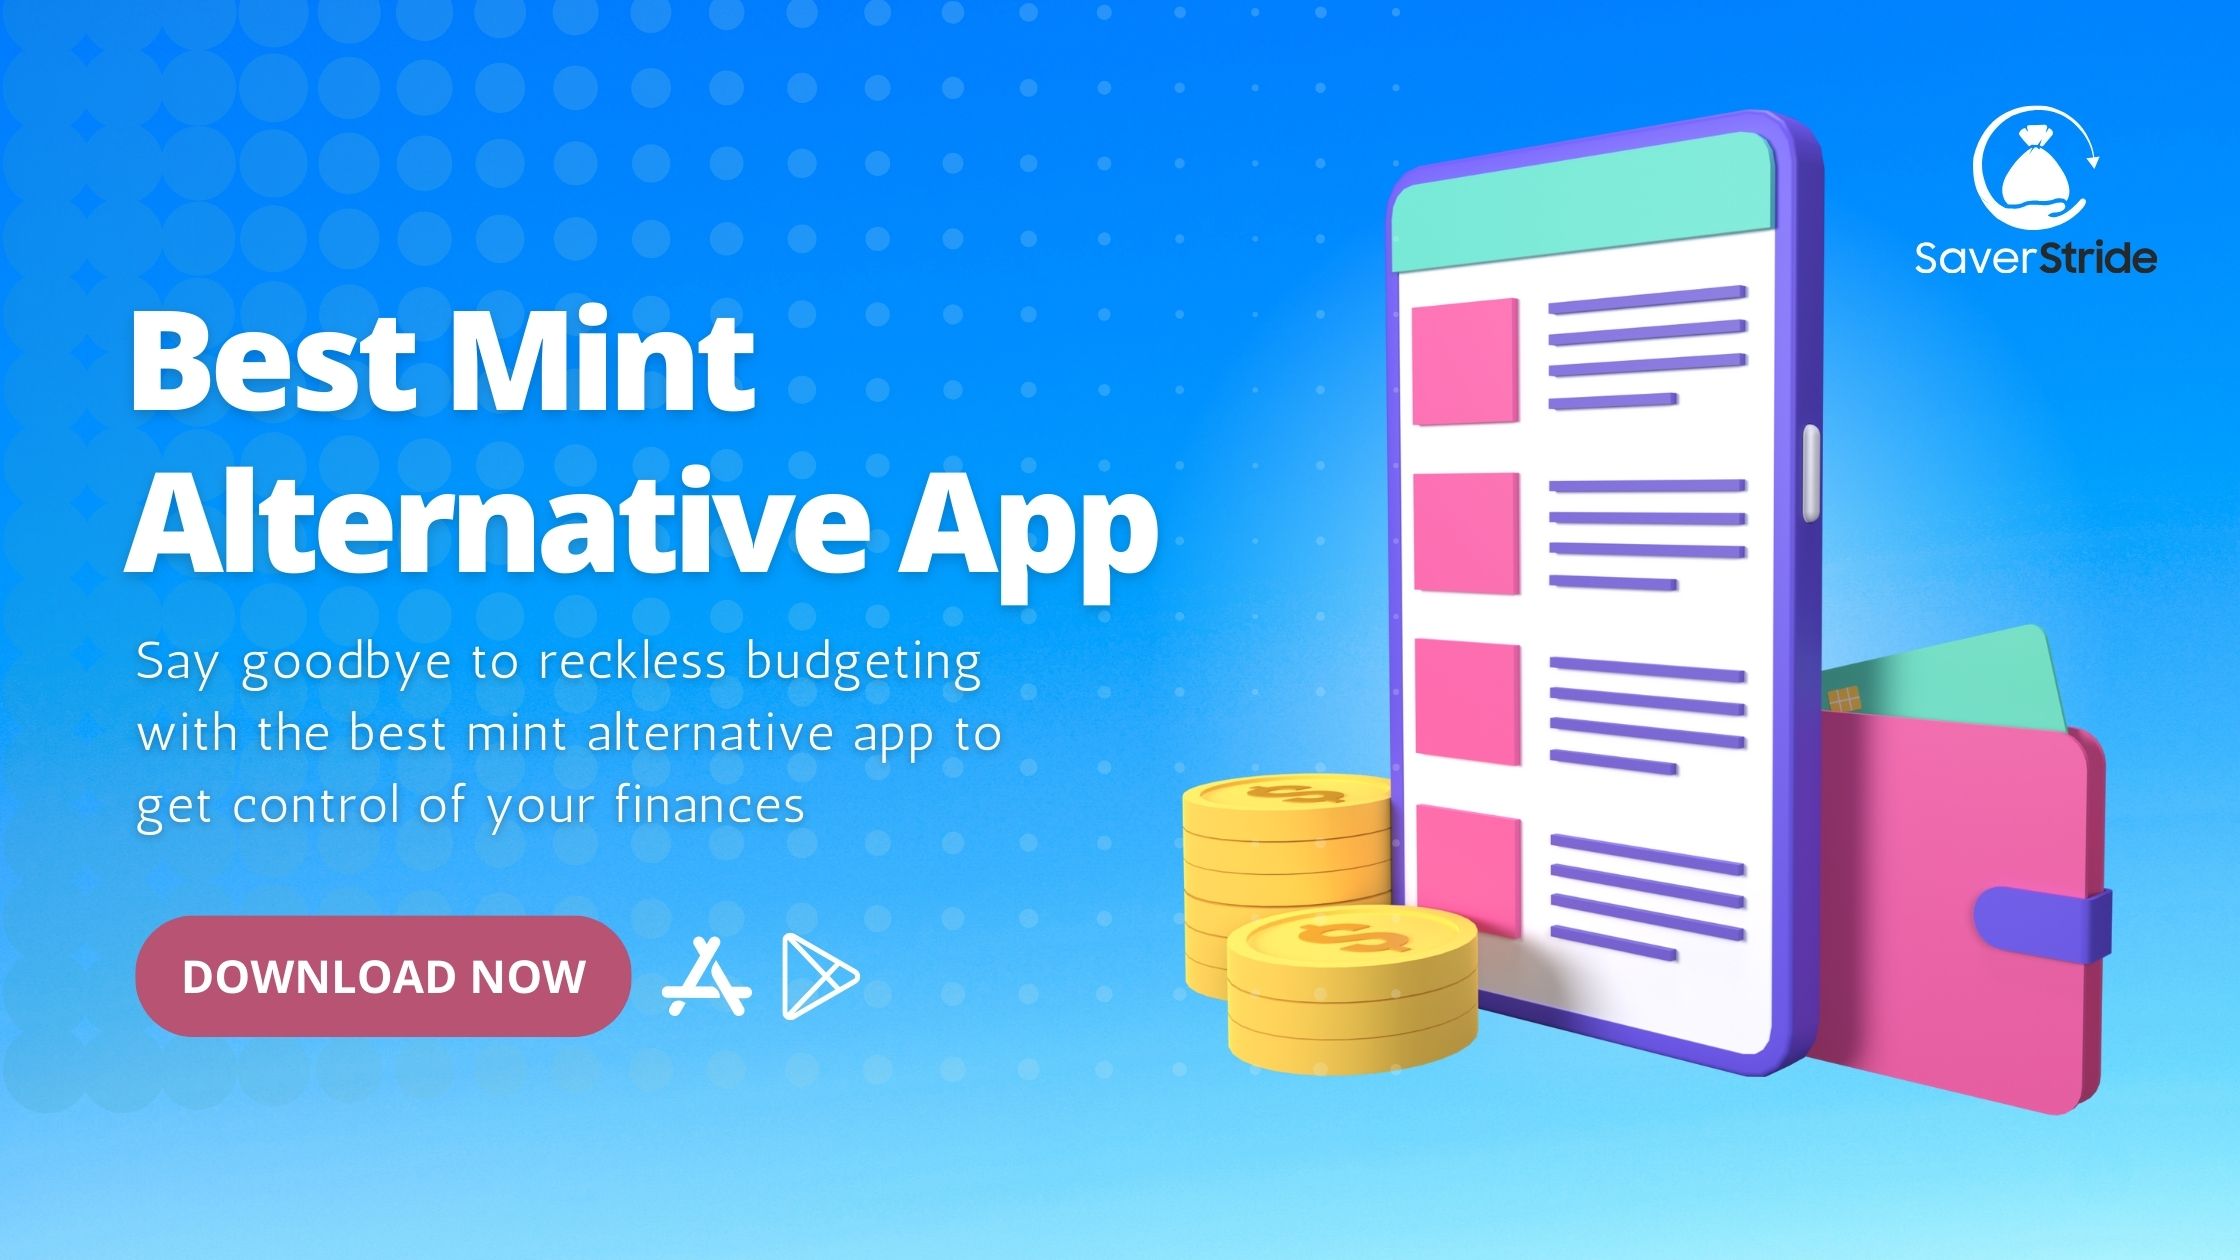 Introducing The Best Mint Alternative App to Replace Reckless Budgeting 